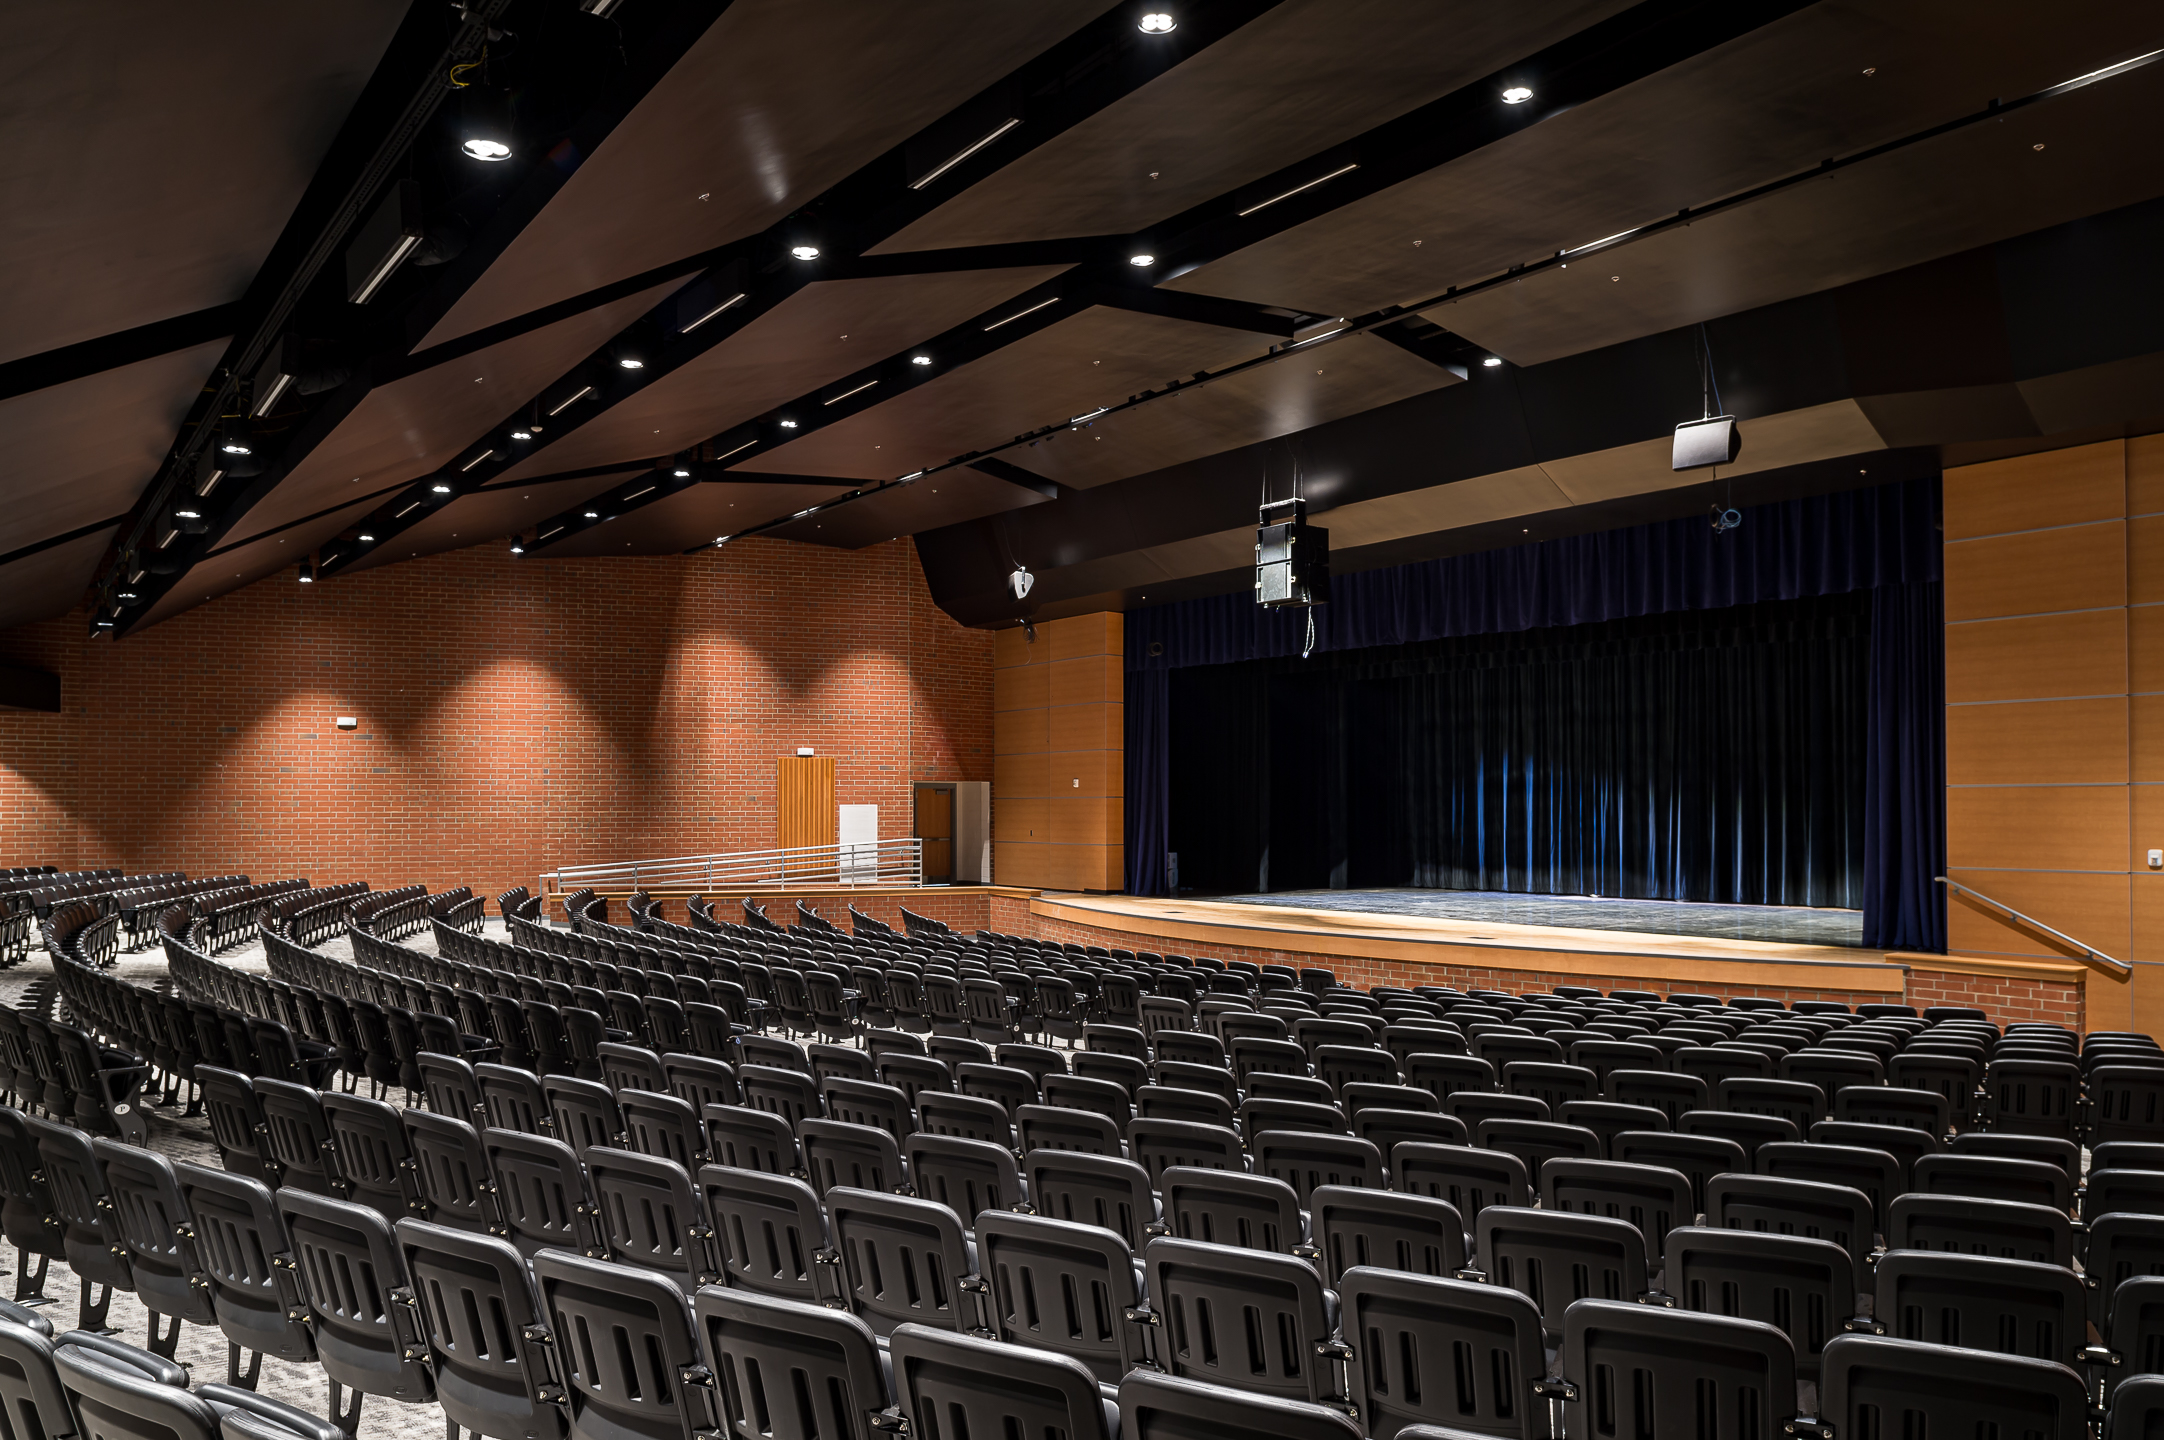 A large auditorium with rows of chairs and a stage, captured by professional architectural photographer